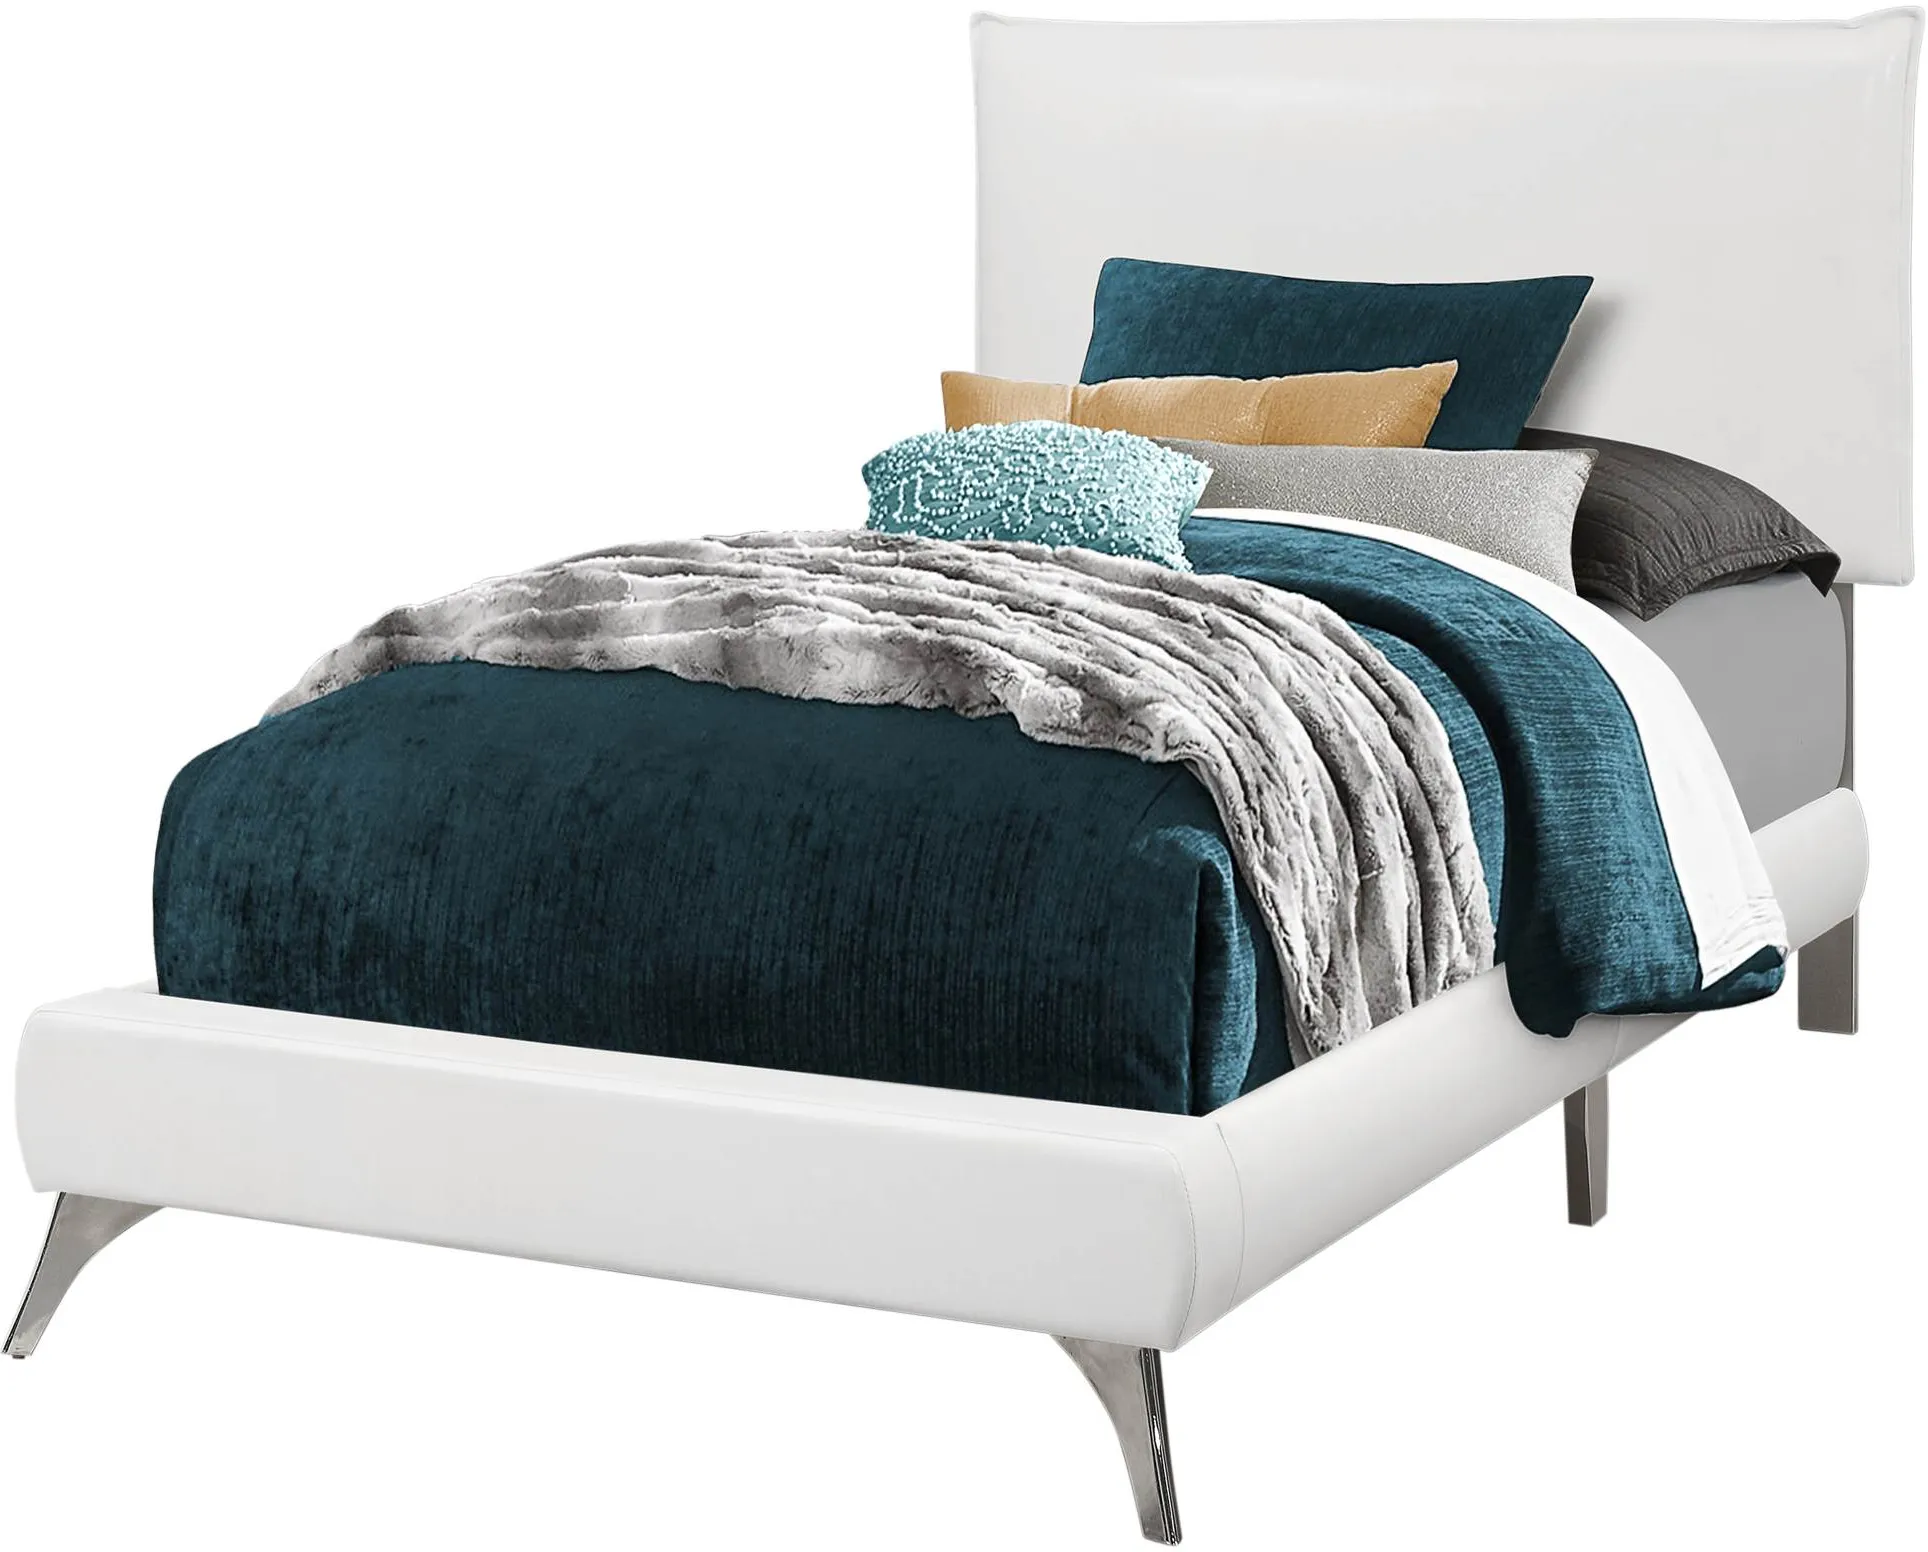 Bed, Twin Size, Platform, Teen, Frame, Upholstered, Pu Leather Look, Metal Legs, White, Chrome, Contemporary, Modern